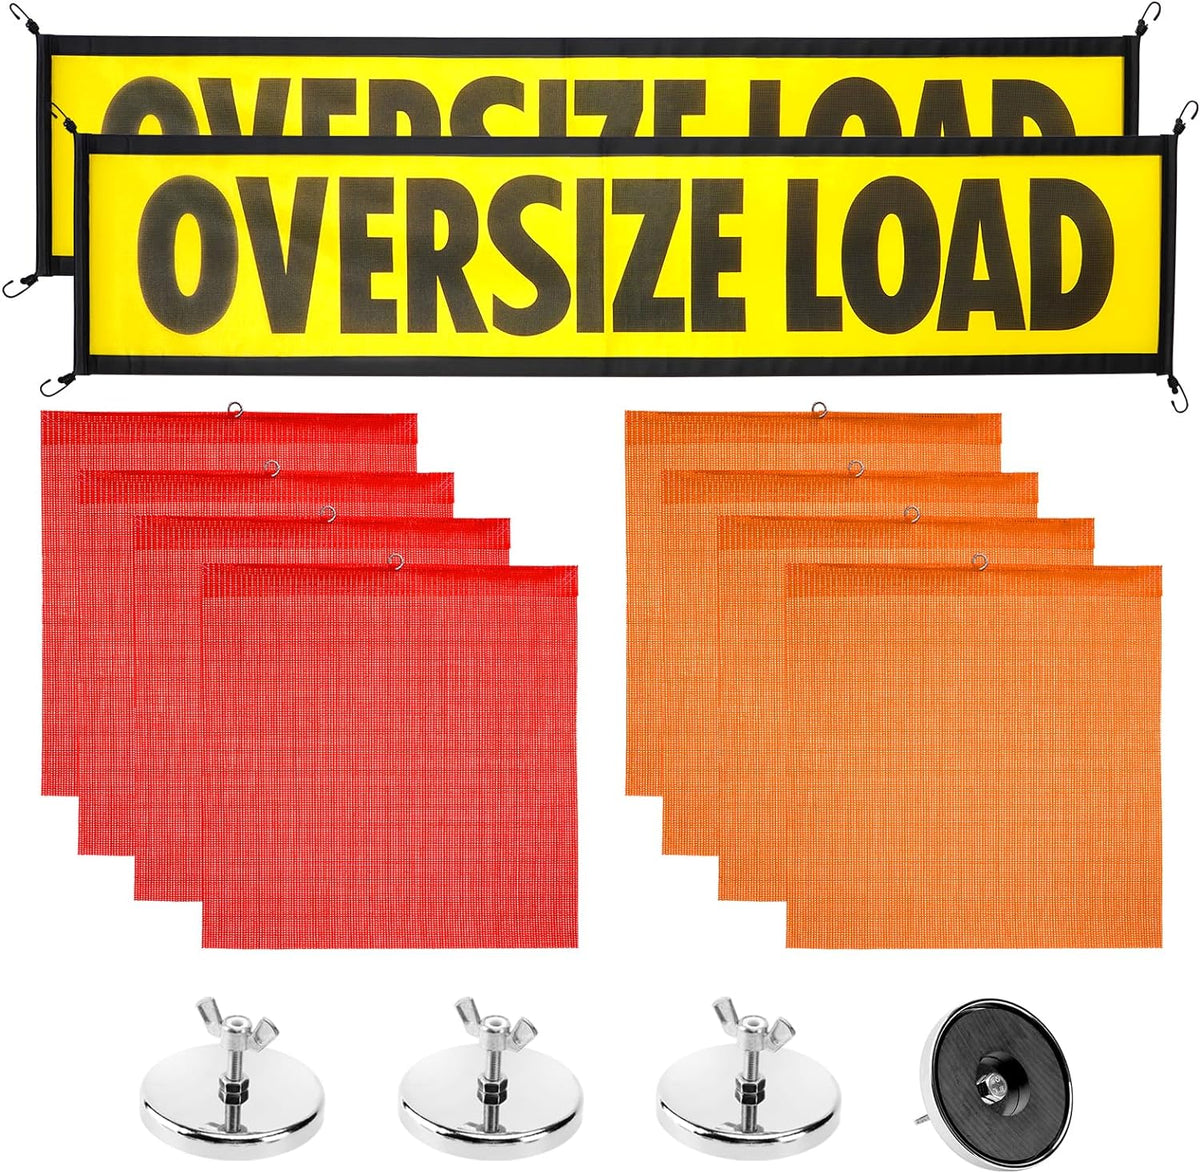 Oversize Load Flags, Red and Orange flags w/ Magnetic flag holders.